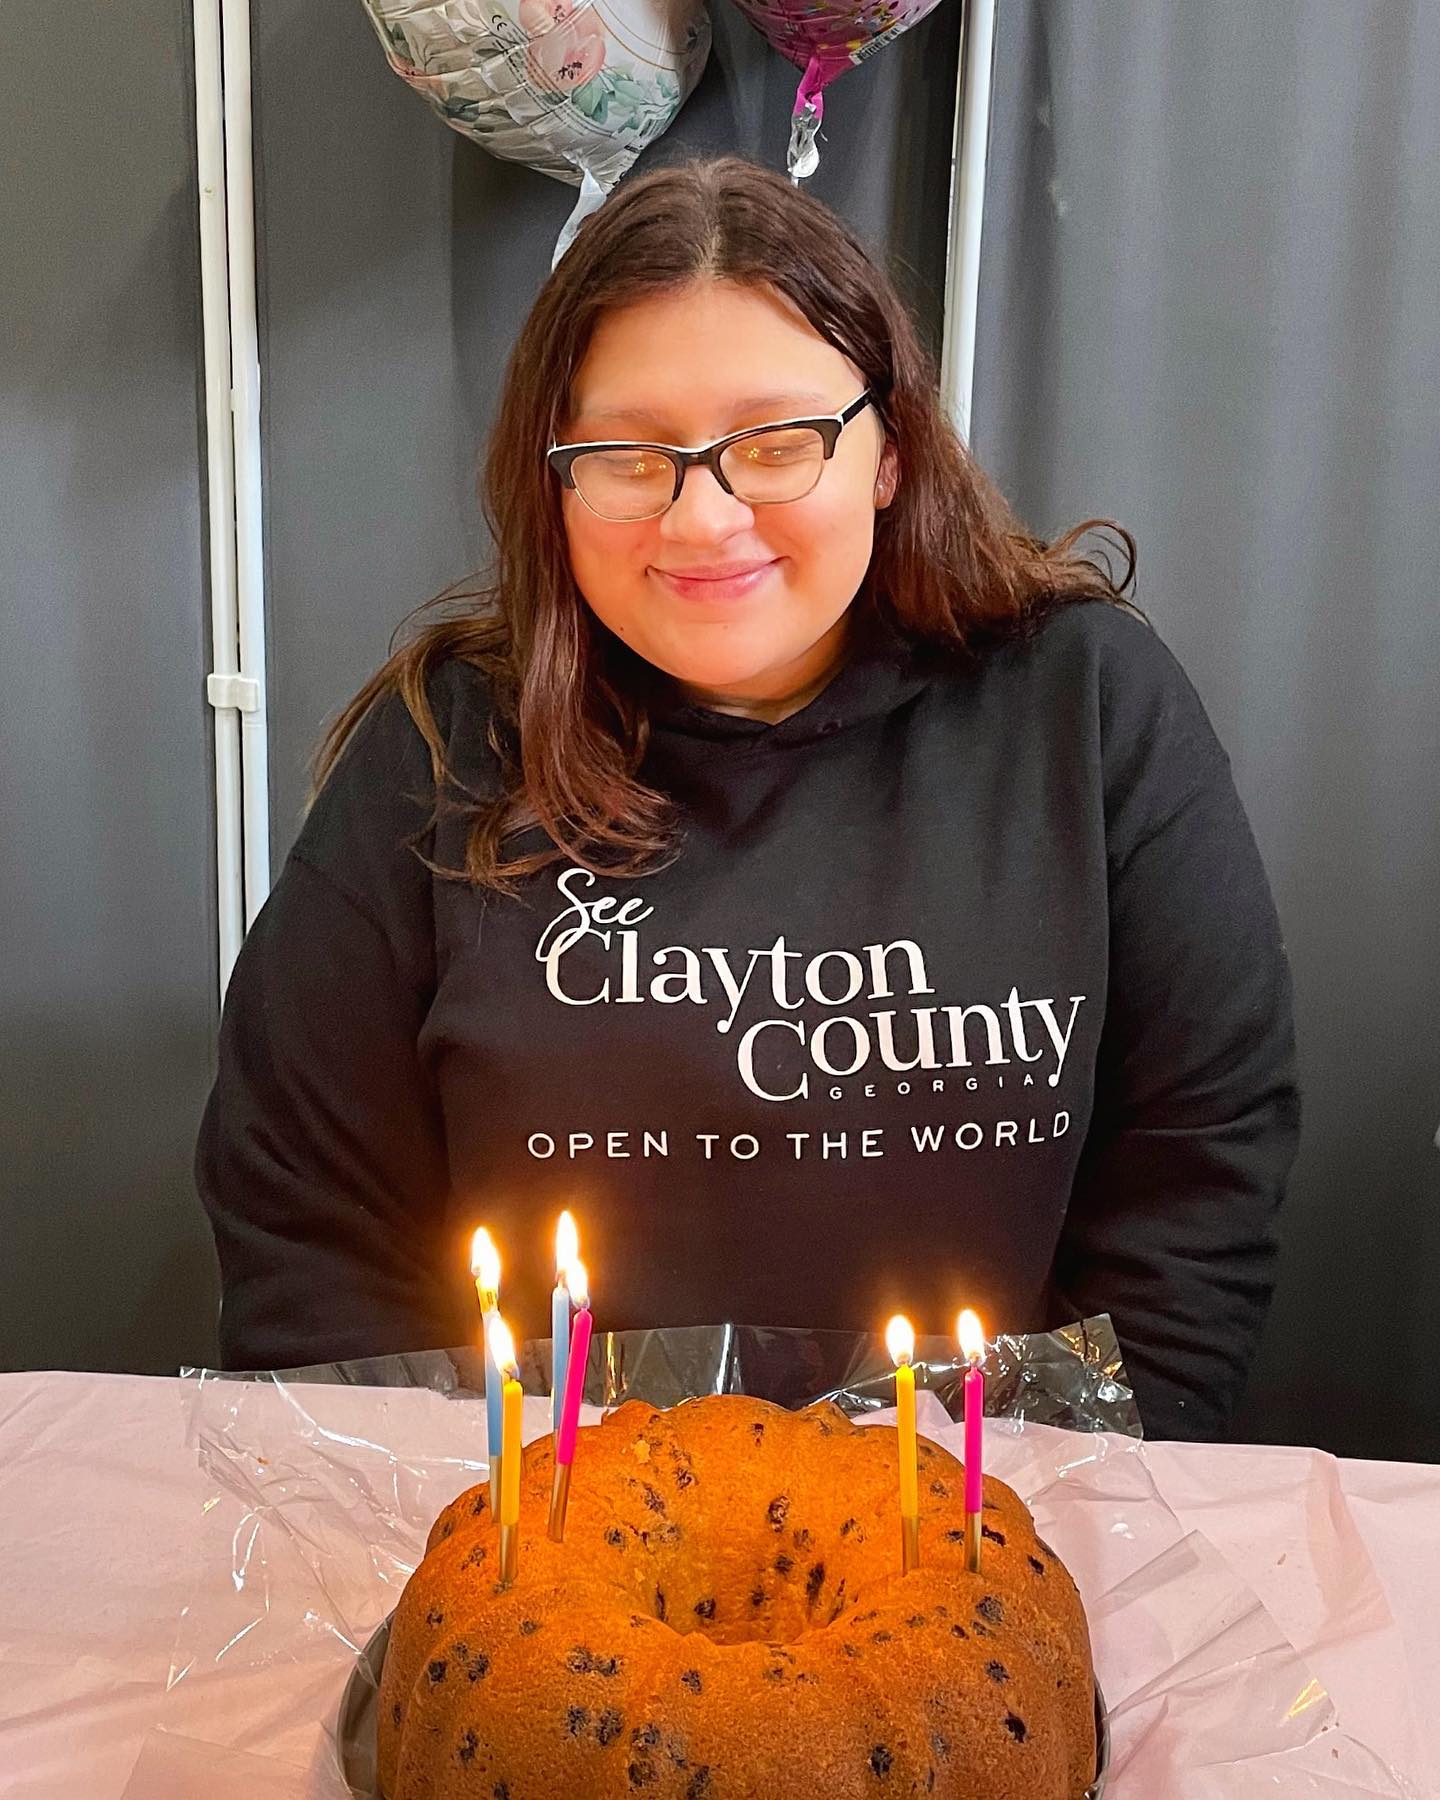 Those of you who have visited the Clayton County Visitors Center know that you will always be greeted with a friendly face and a bright smile every day. We are truly grateful for our enthusiastic, dedicated staff. Please stop by and wish Emileigh a happy birthday! 🎂🎈#seeclaytoncountyga